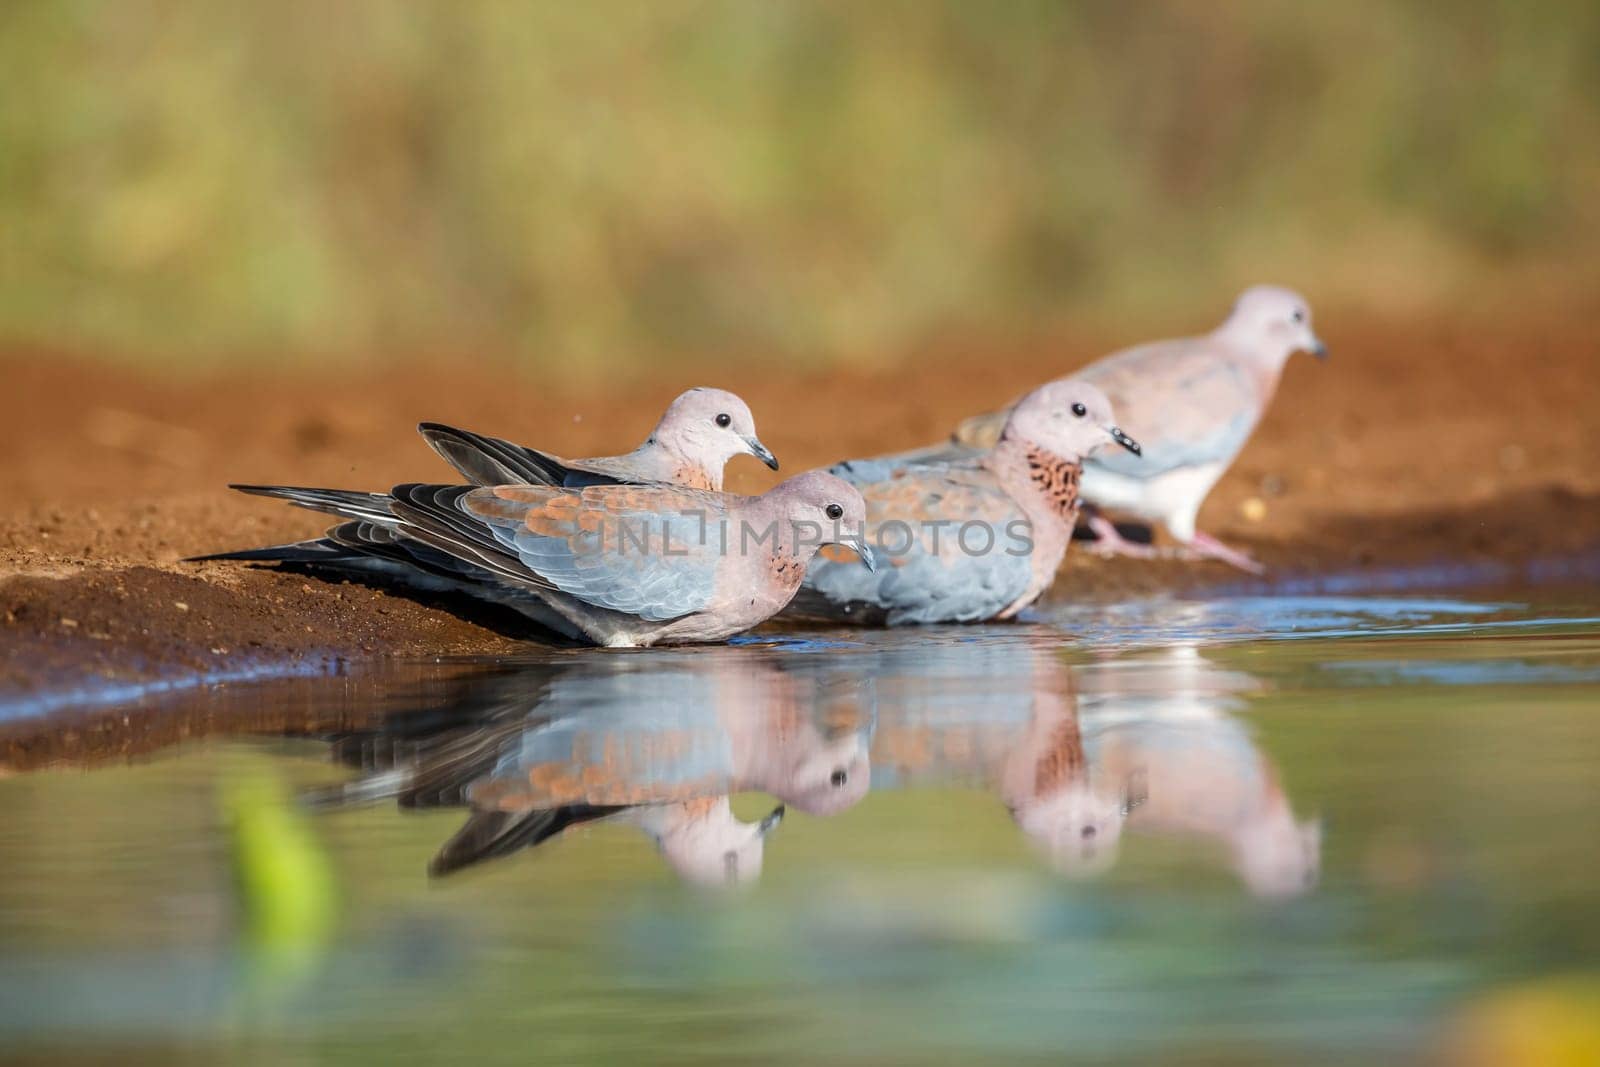 Laughing dove in Kruger national park, South Africa by PACOCOMO